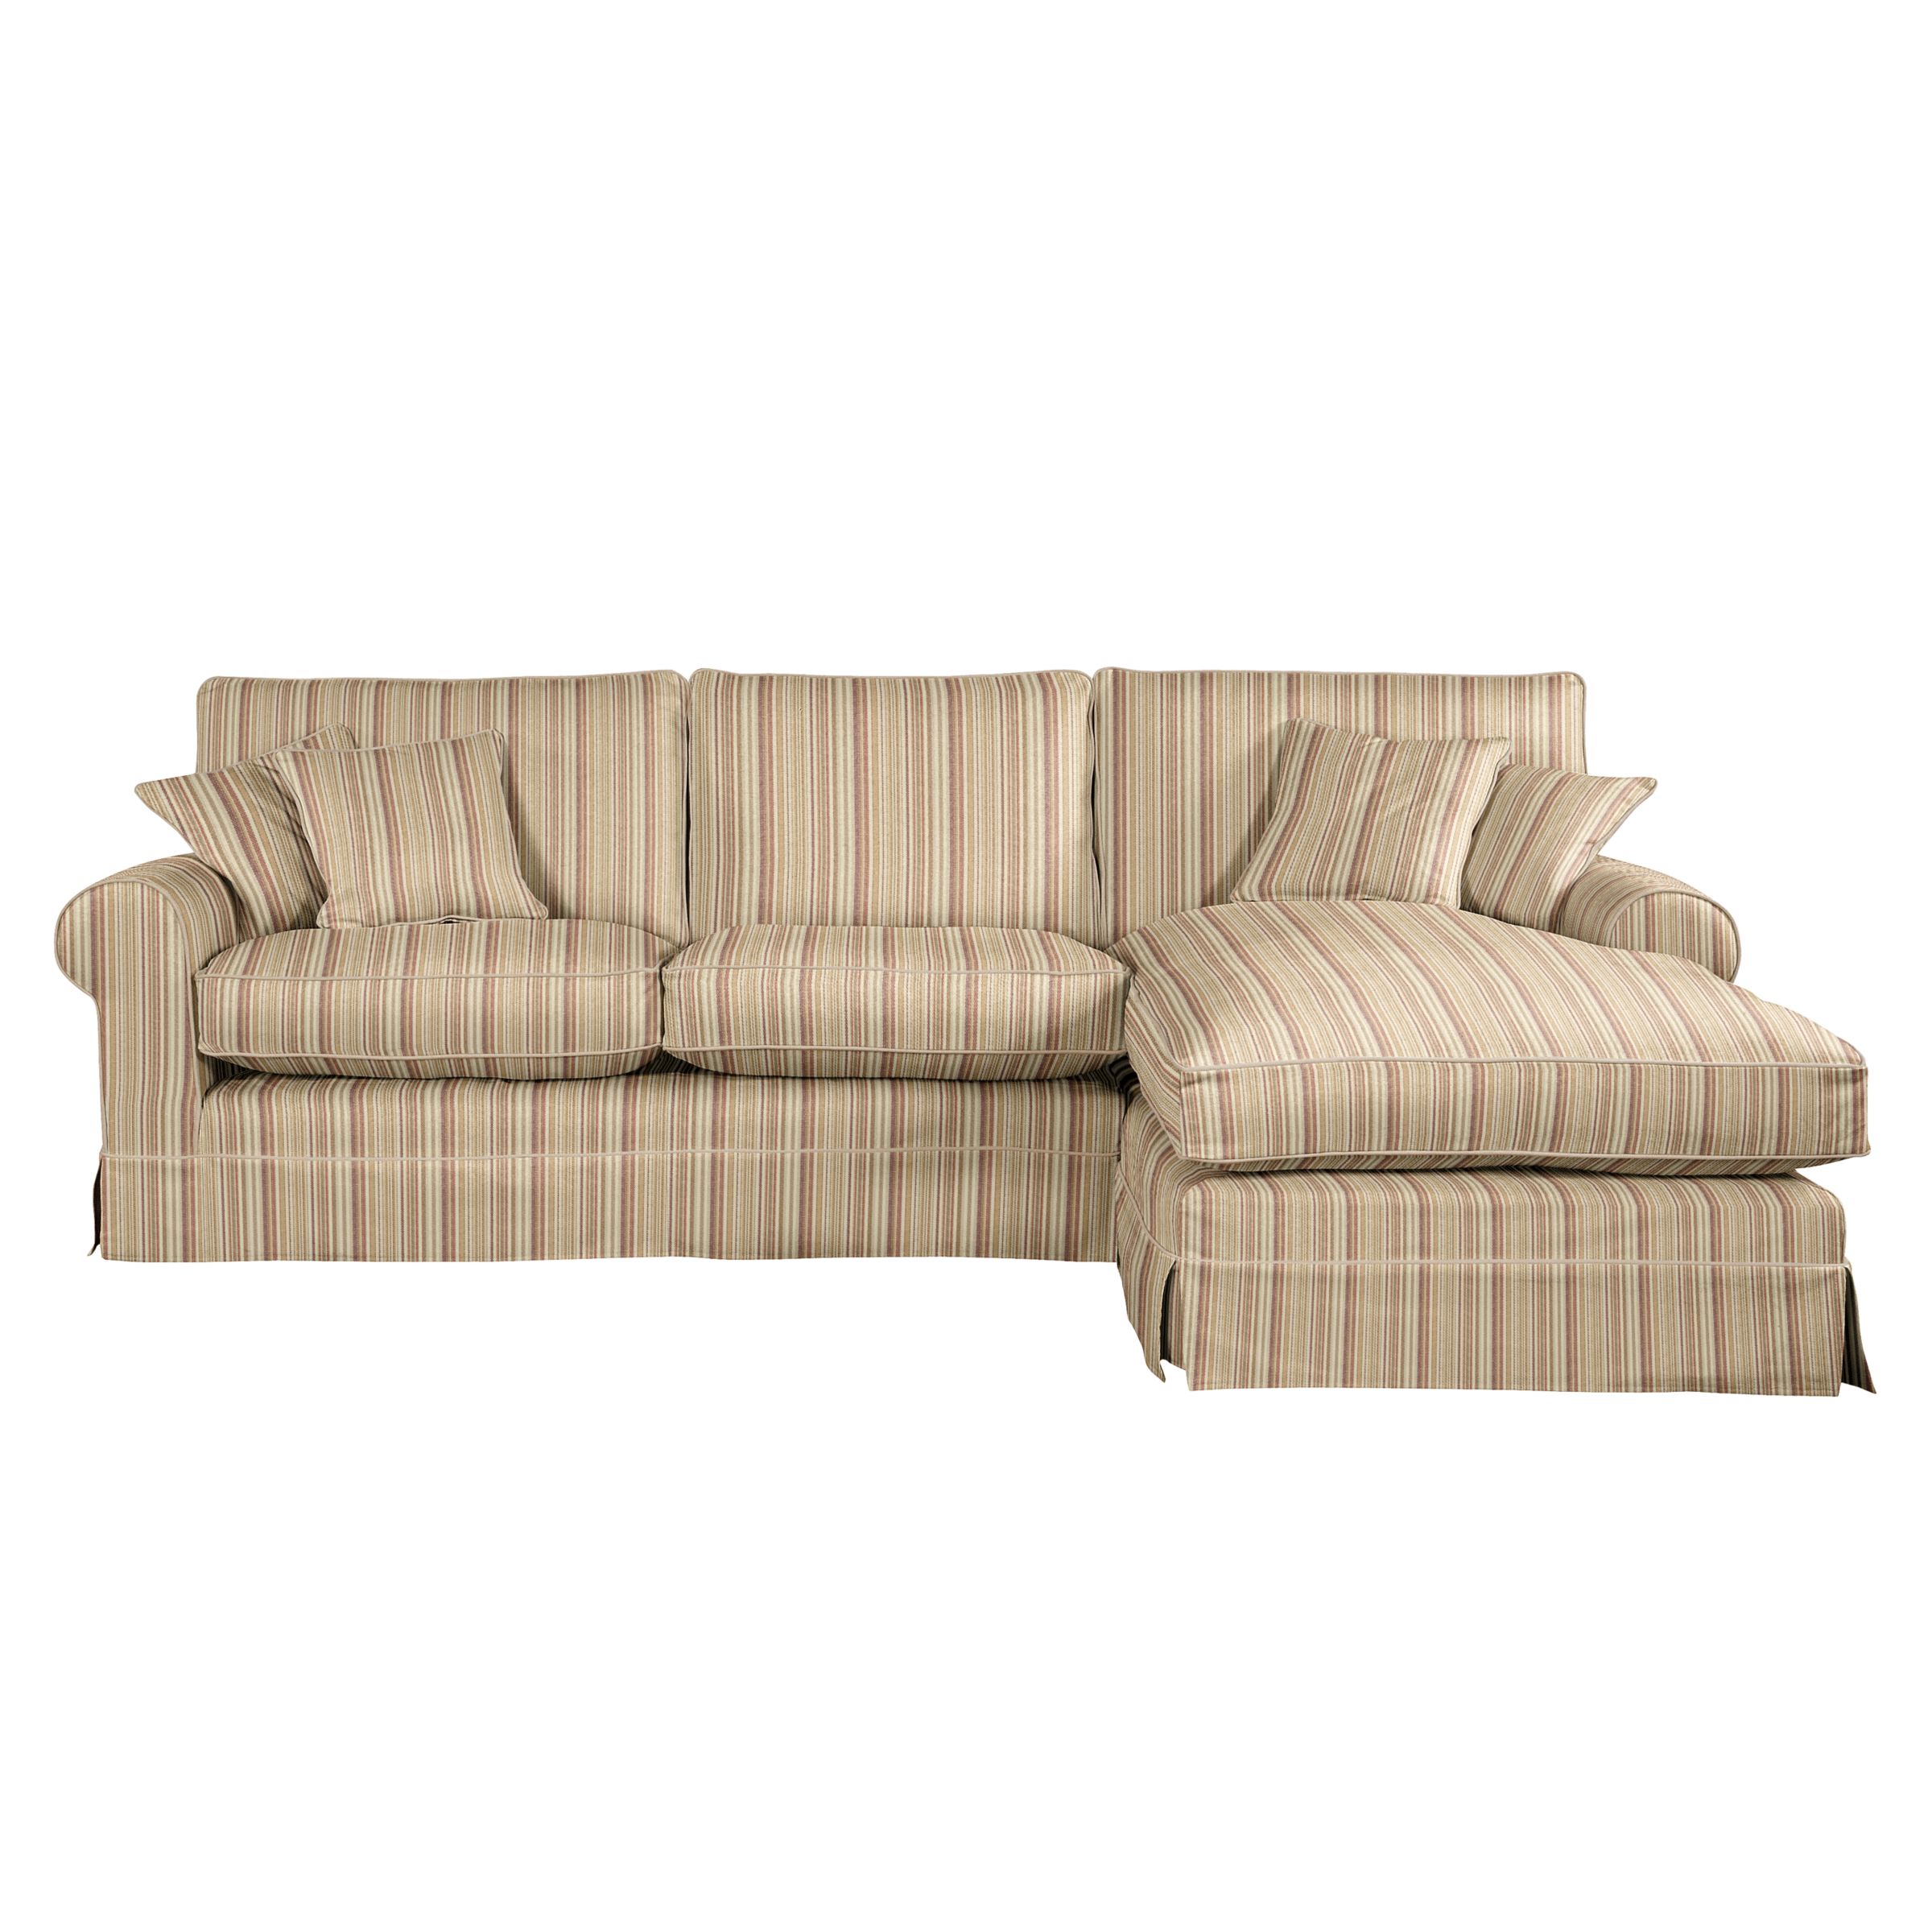 John Lewis Padstow Chaise End Sofa, Right Facing, Mulberry, width 278cm